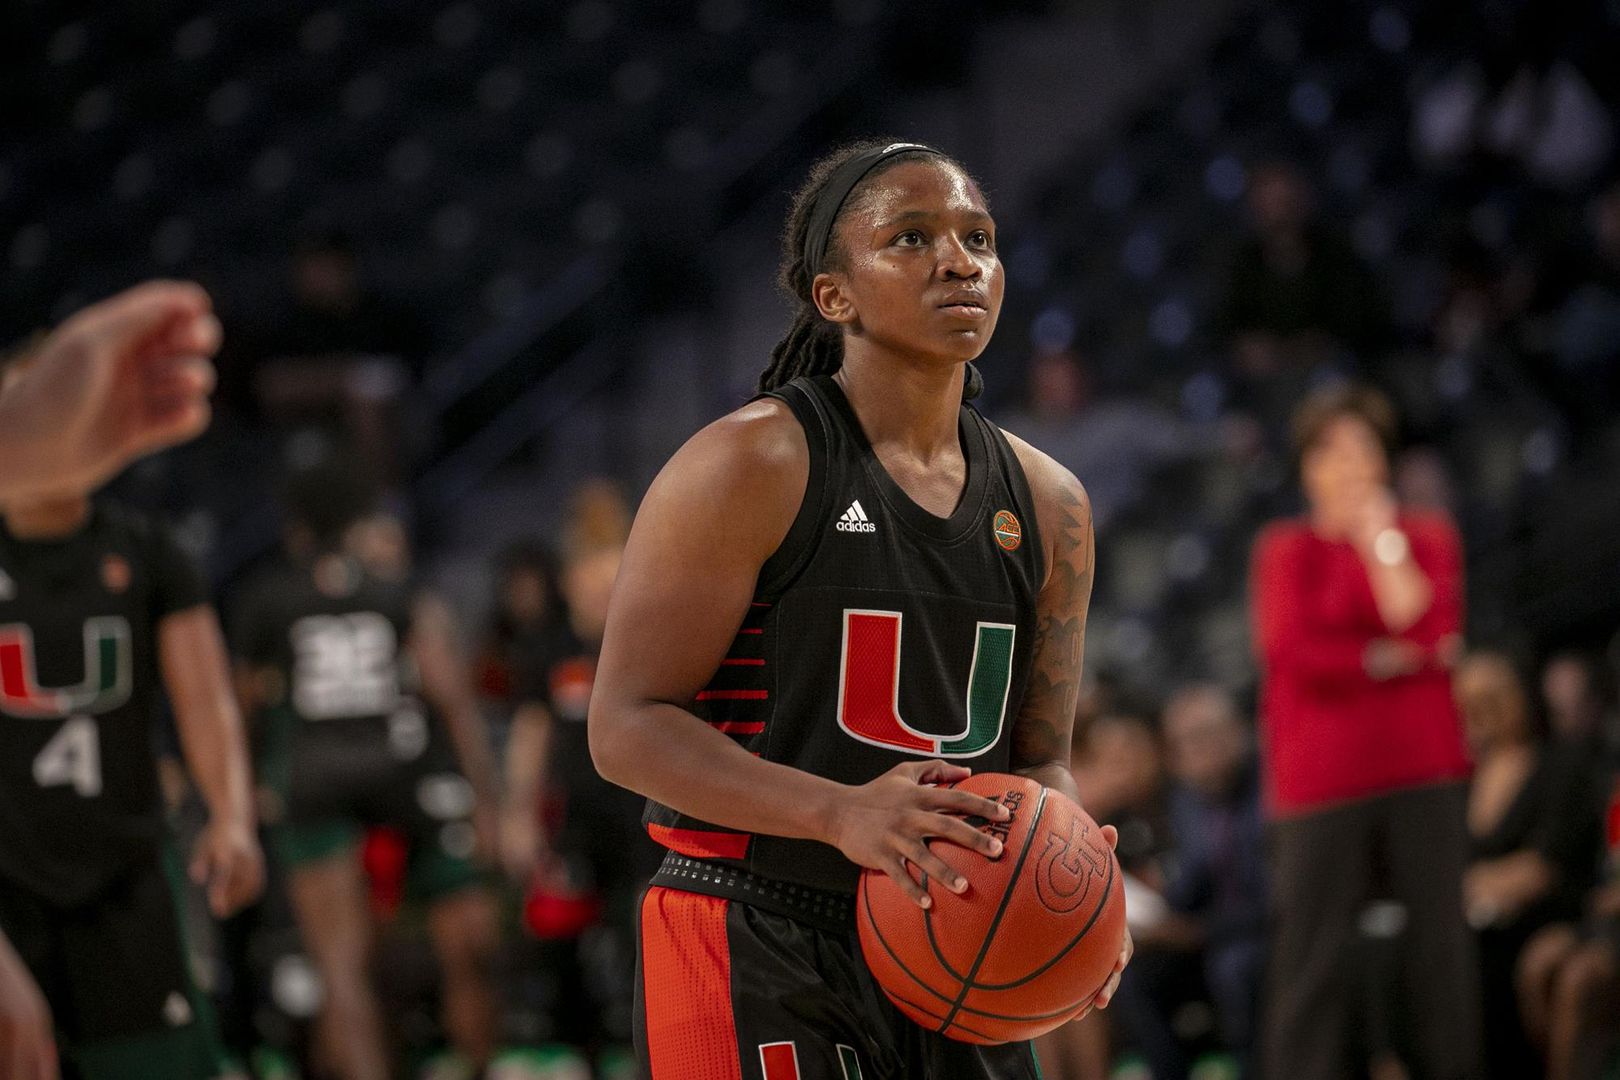 Canes Host In-State Rival Florida State on Sunday